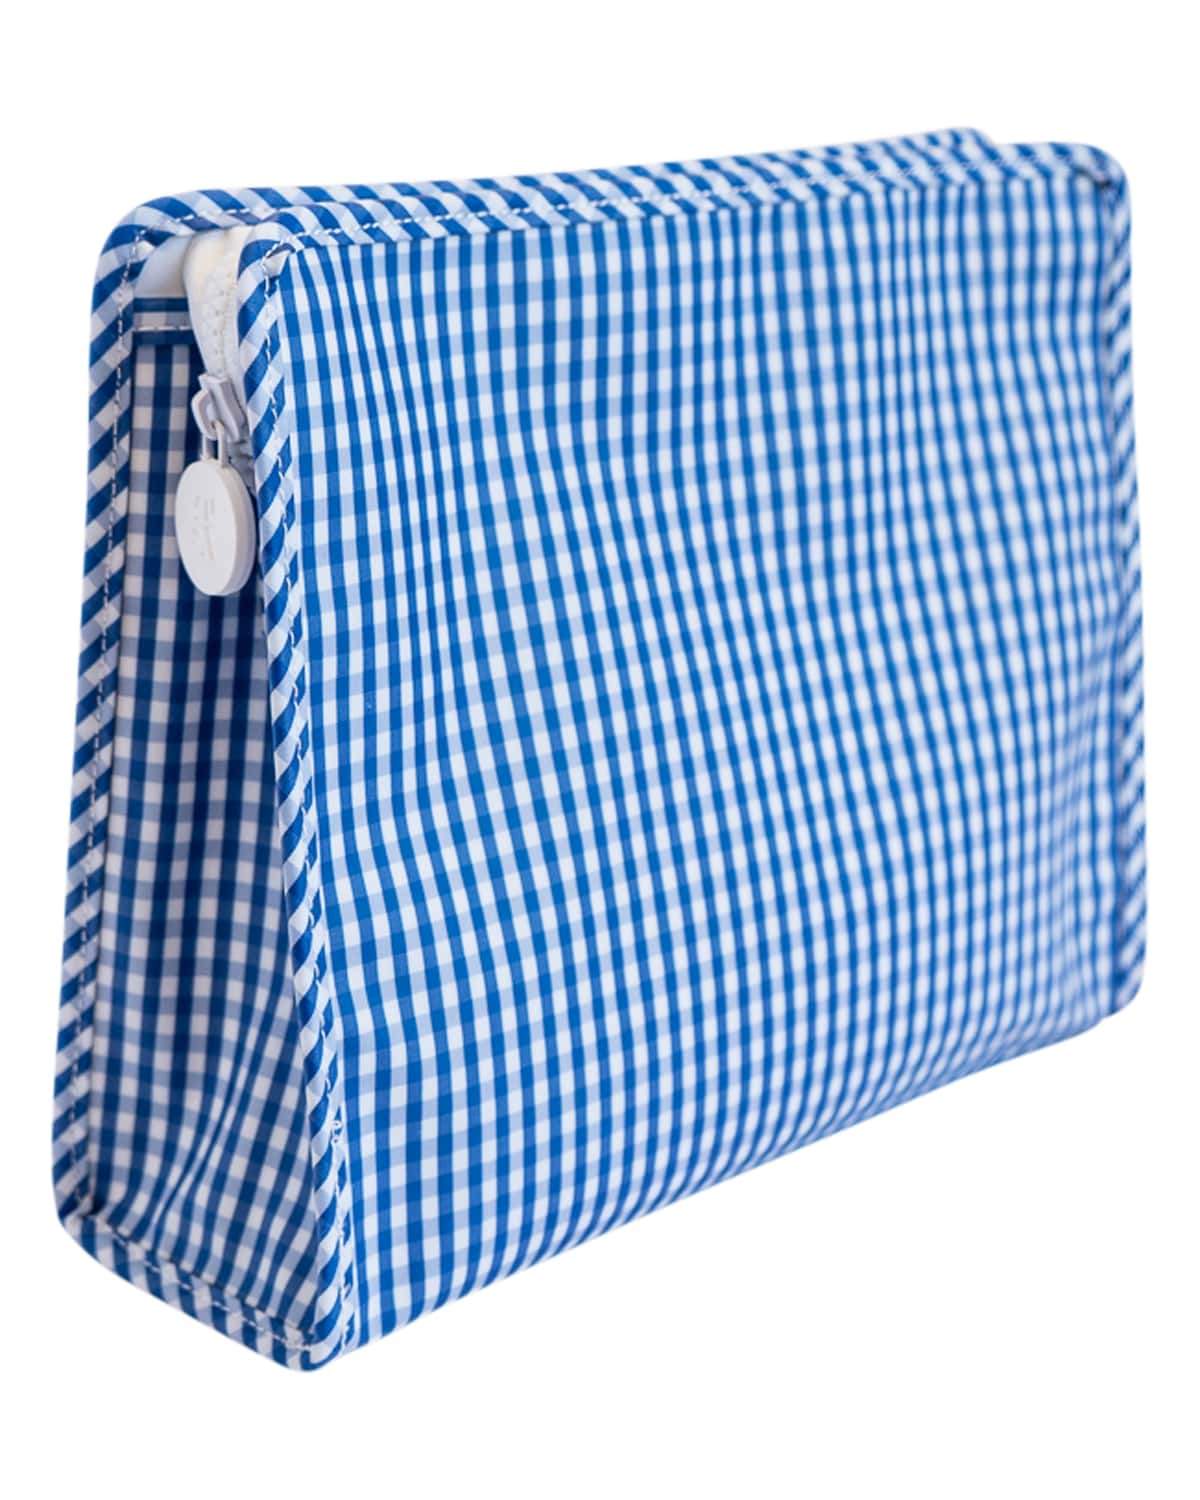 Roadie Gingham Travel Bag Large - more colors available - The Preppy Bunny